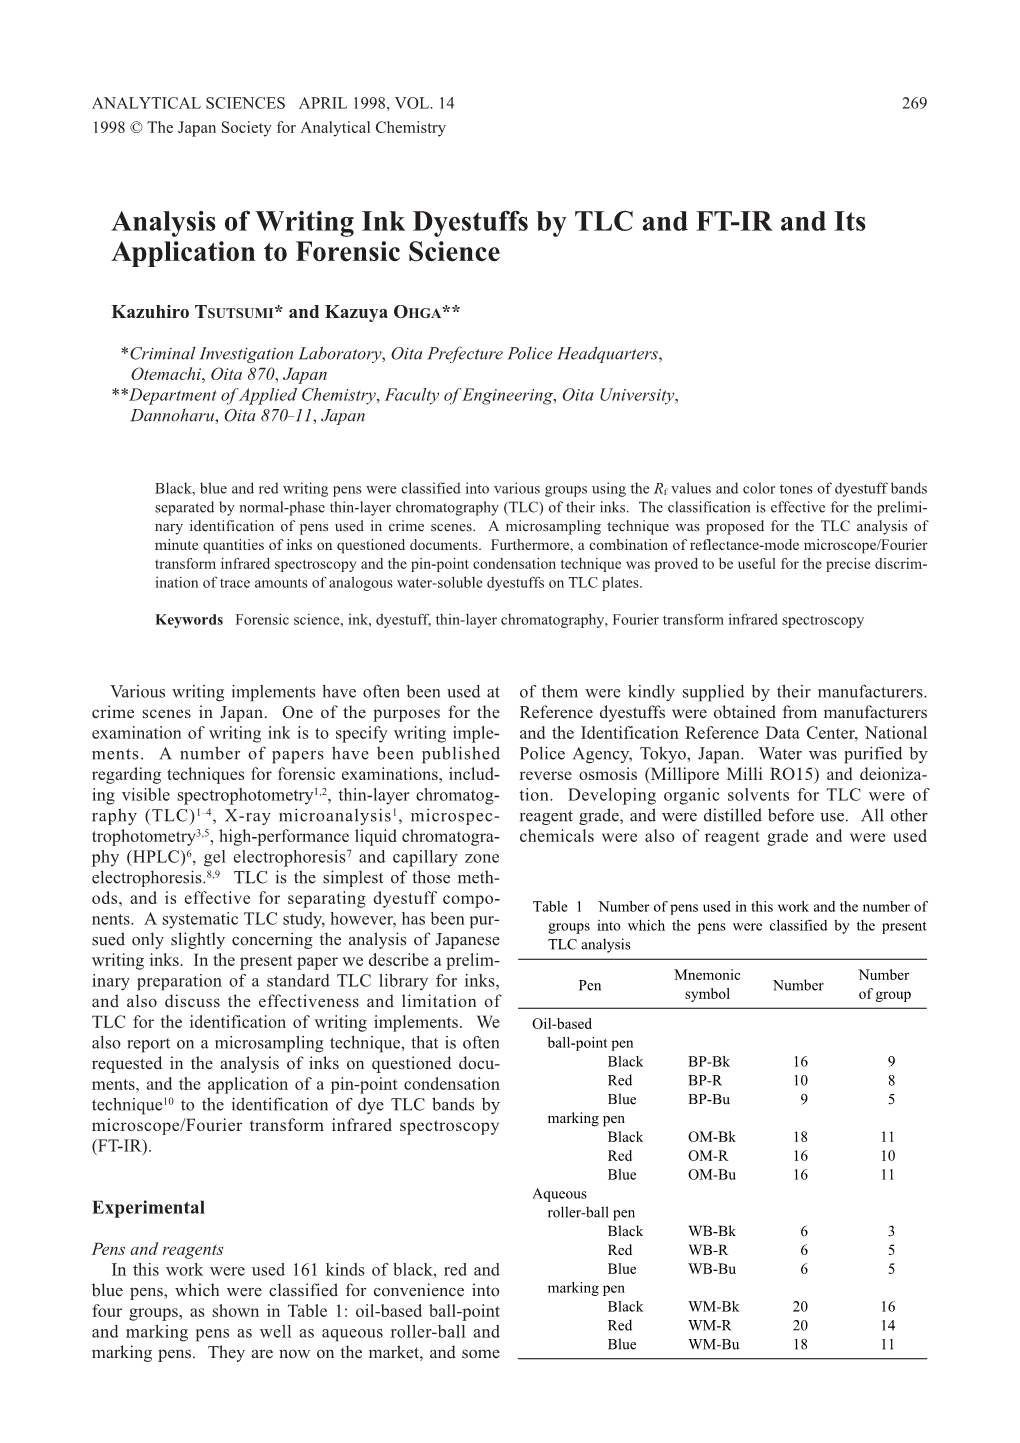 Analysis of Writing Ink Dyestuffs by TLC and FT-IR and Its Application to Forensic Science